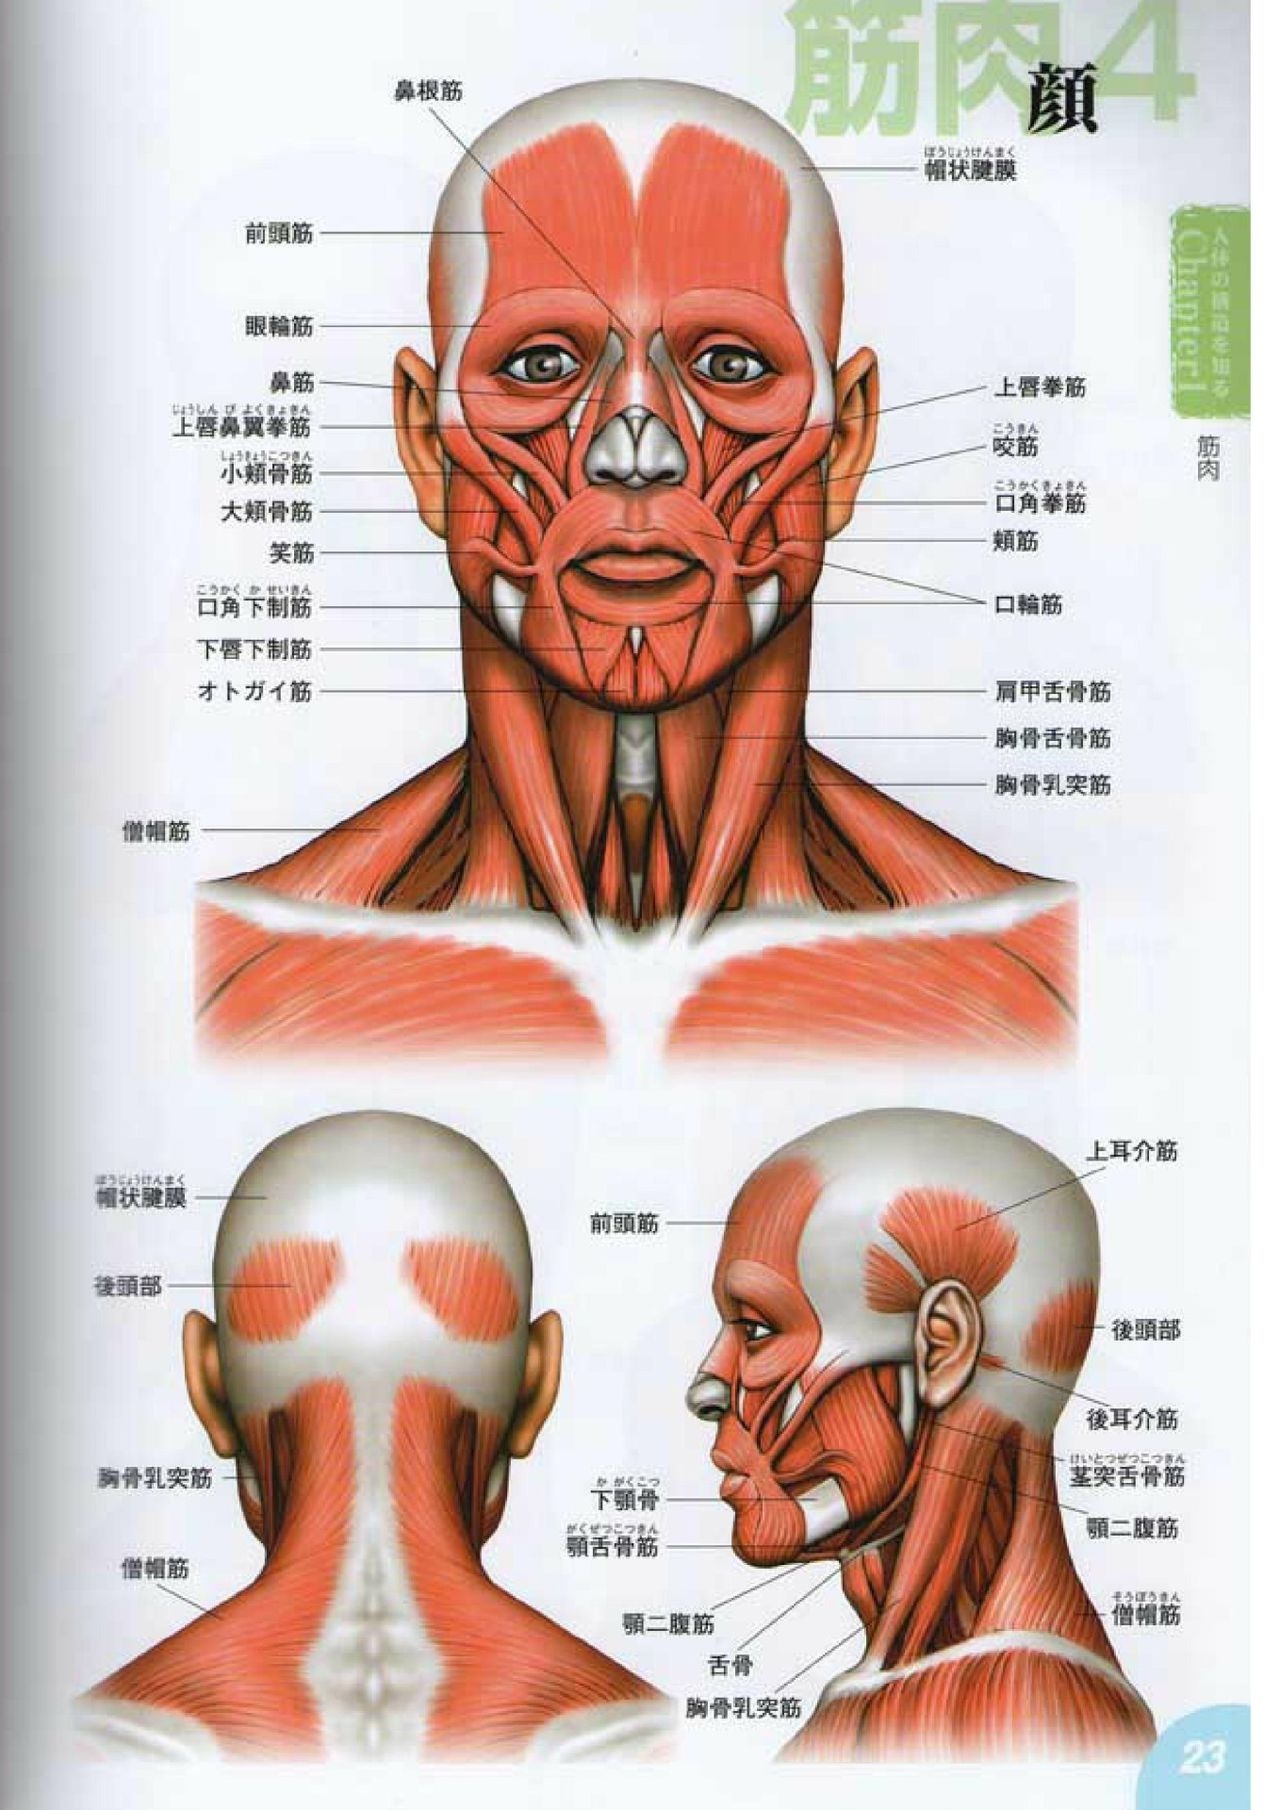 How to draw a character drawing from a human anatomical chart 22